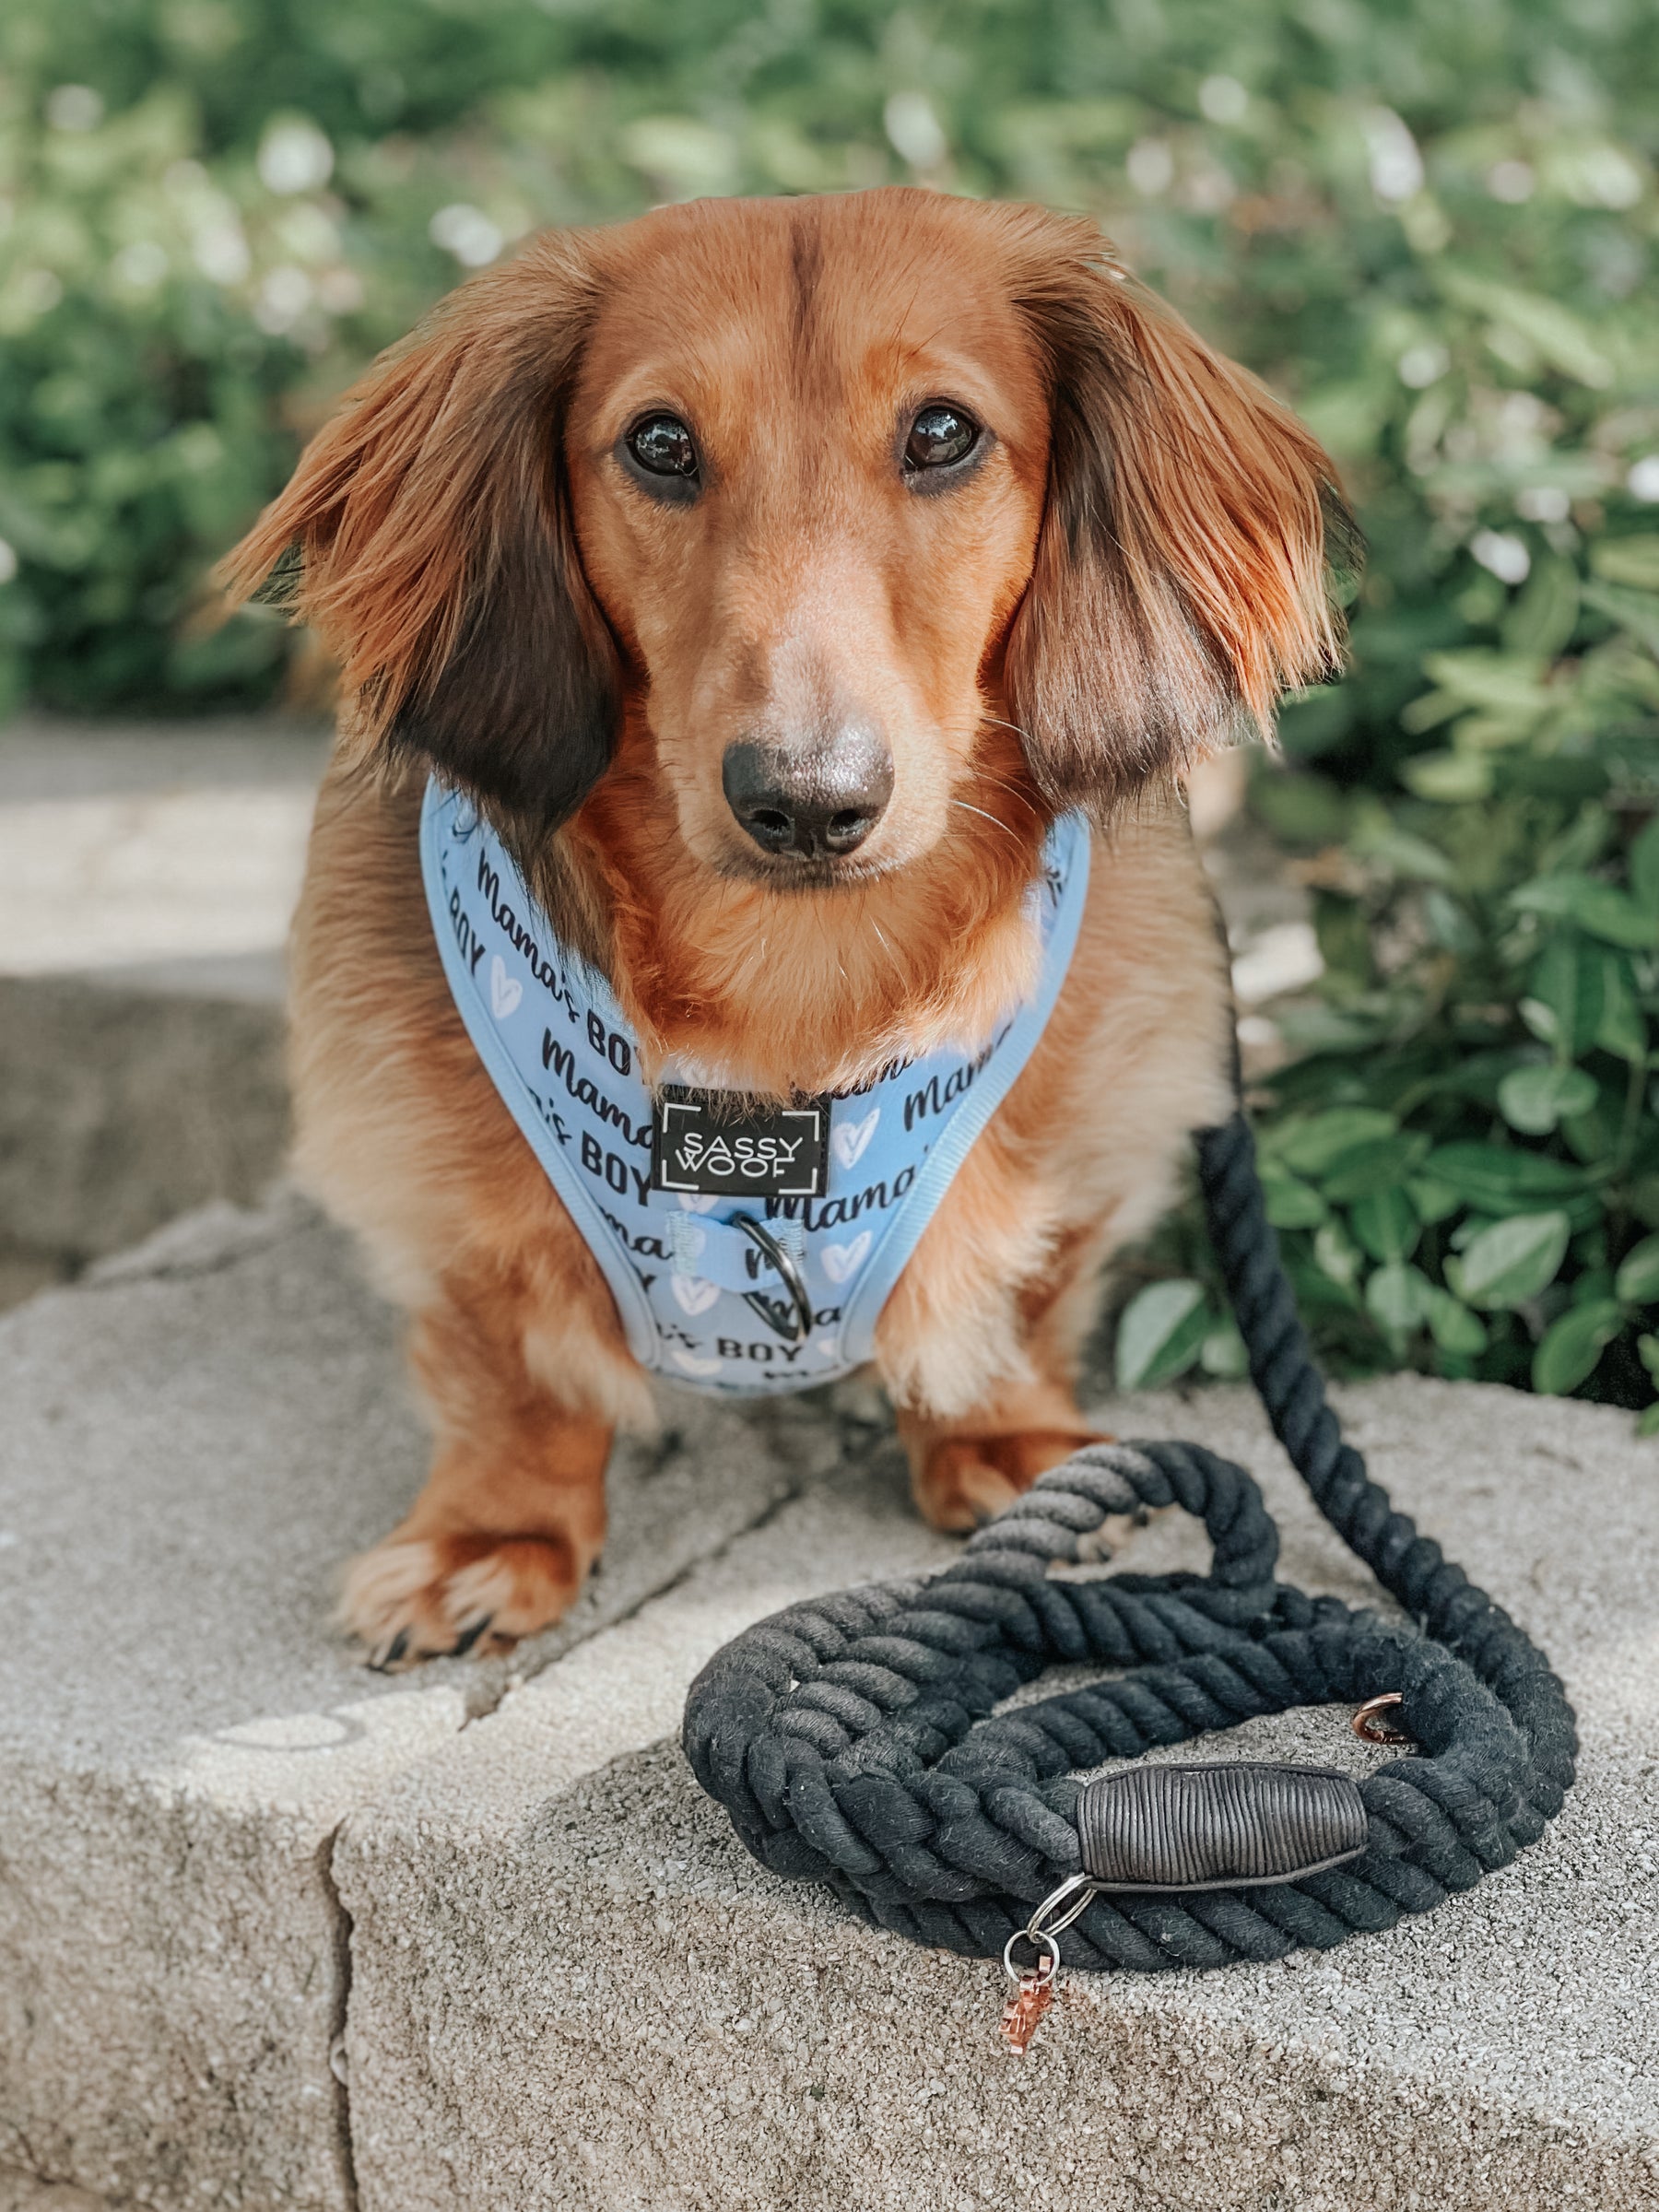 A Short Haired Miniature Dachshund on a Lead and Wearing a Harness